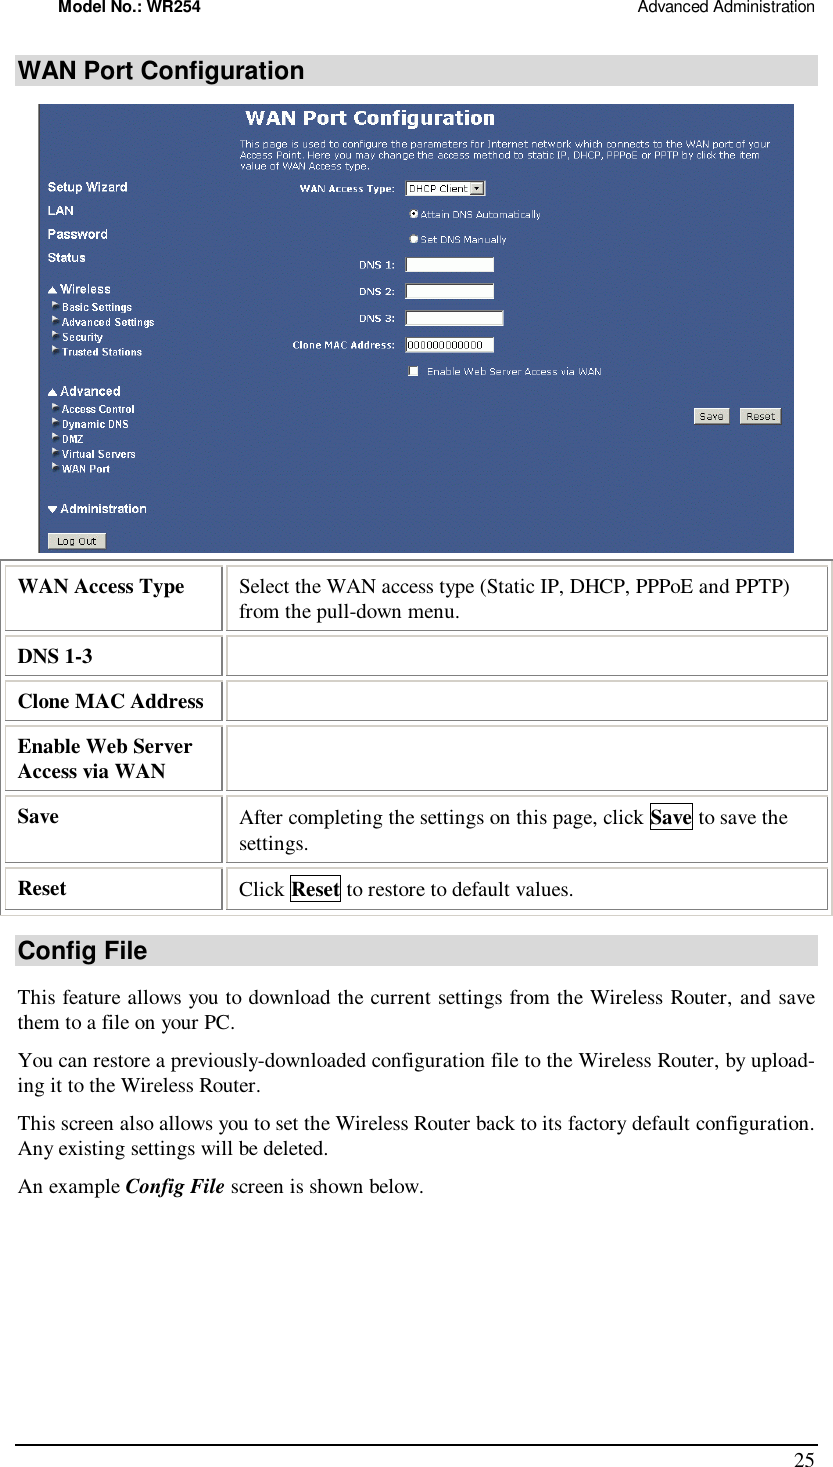 Model No.: WR254                                                                                                 Advanced Administration 25 WAN Port Configuration  WAN Access Type  Select the WAN access type (Static IP, DHCP, PPPoE and PPTP) from the pull-down menu. DNS 1-3   Clone MAC Address   Enable Web Server Access via WAN   Save   After completing the settings on this page, click Save to save the settings. Reset  Click Reset to restore to default values. Config File This feature allows you to download the current settings from the Wireless Router, and save them to a file on your PC. You can restore a previously-downloaded configuration file to the Wireless Router, by upload-ing it to the Wireless Router. This screen also allows you to set the Wireless Router back to its factory default configuration. Any existing settings will be deleted. An example Config File screen is shown below. 